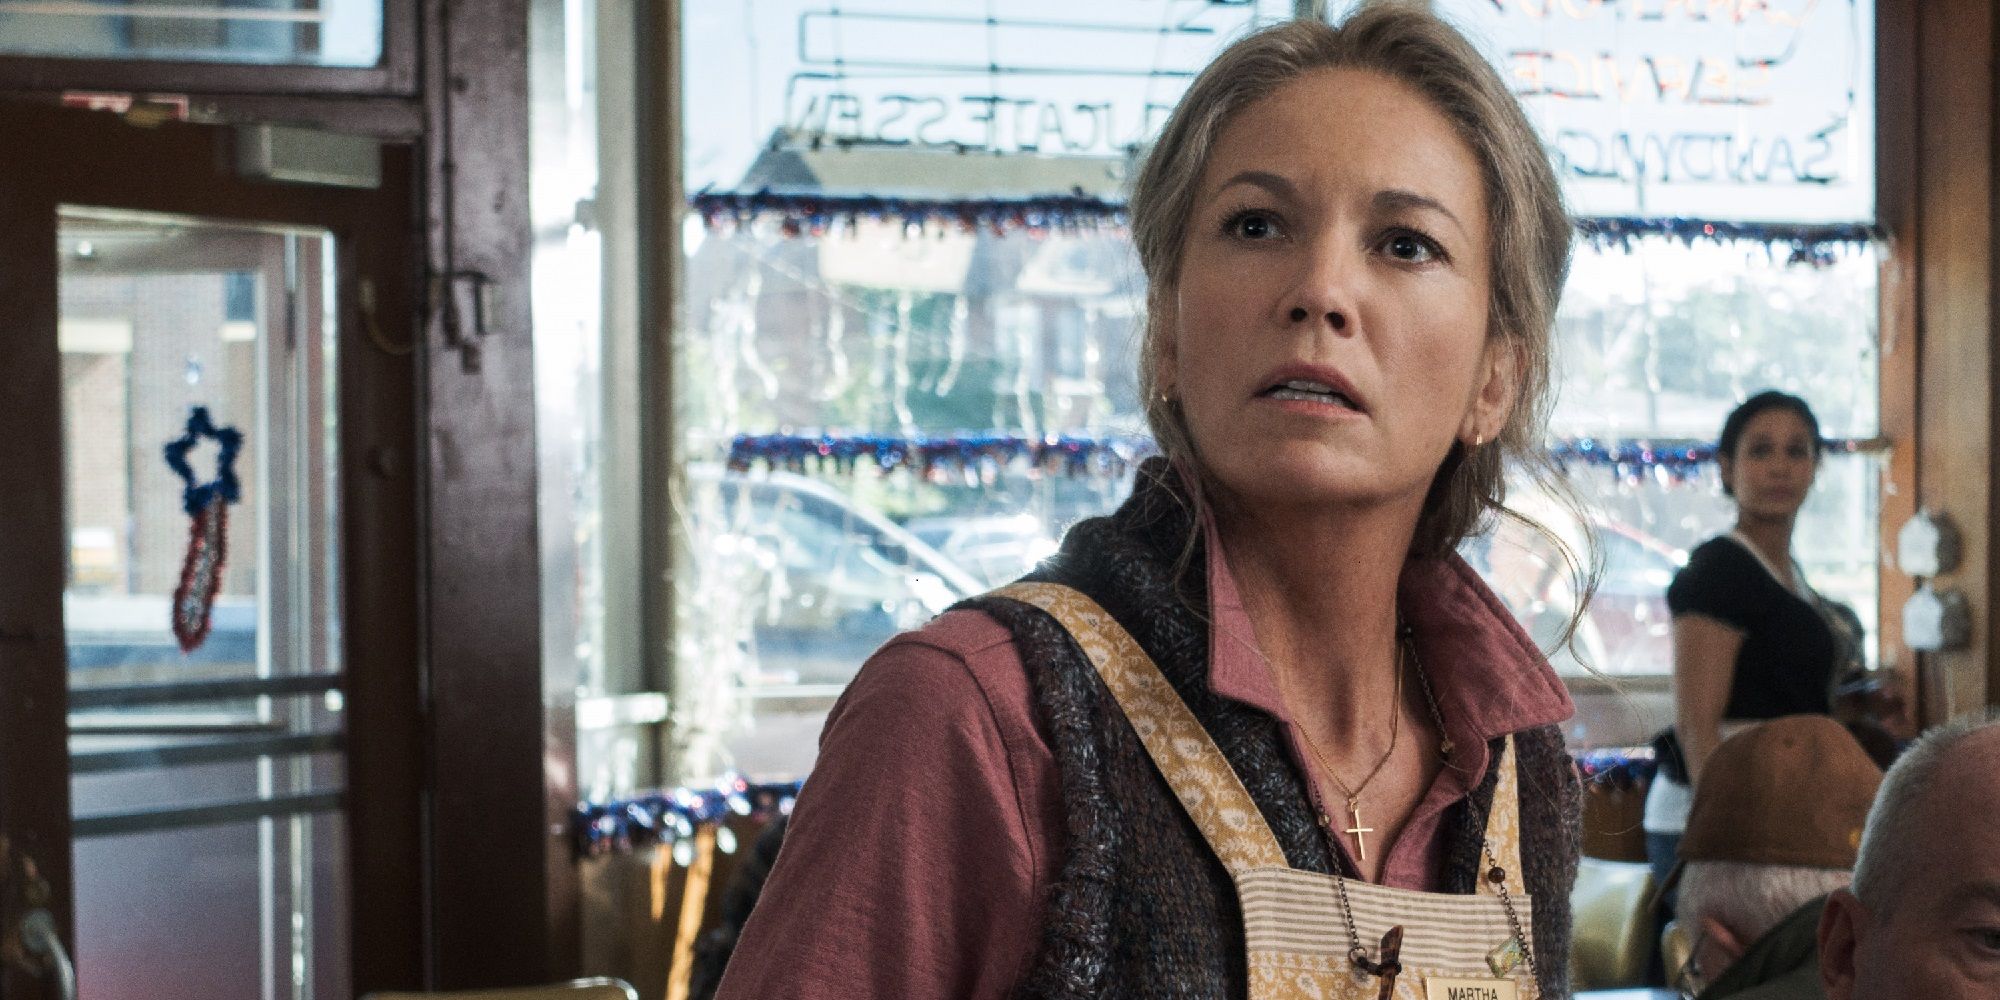 Martha Kent looking up with a surprised expression in Batman v Superman: Dawn of Justice